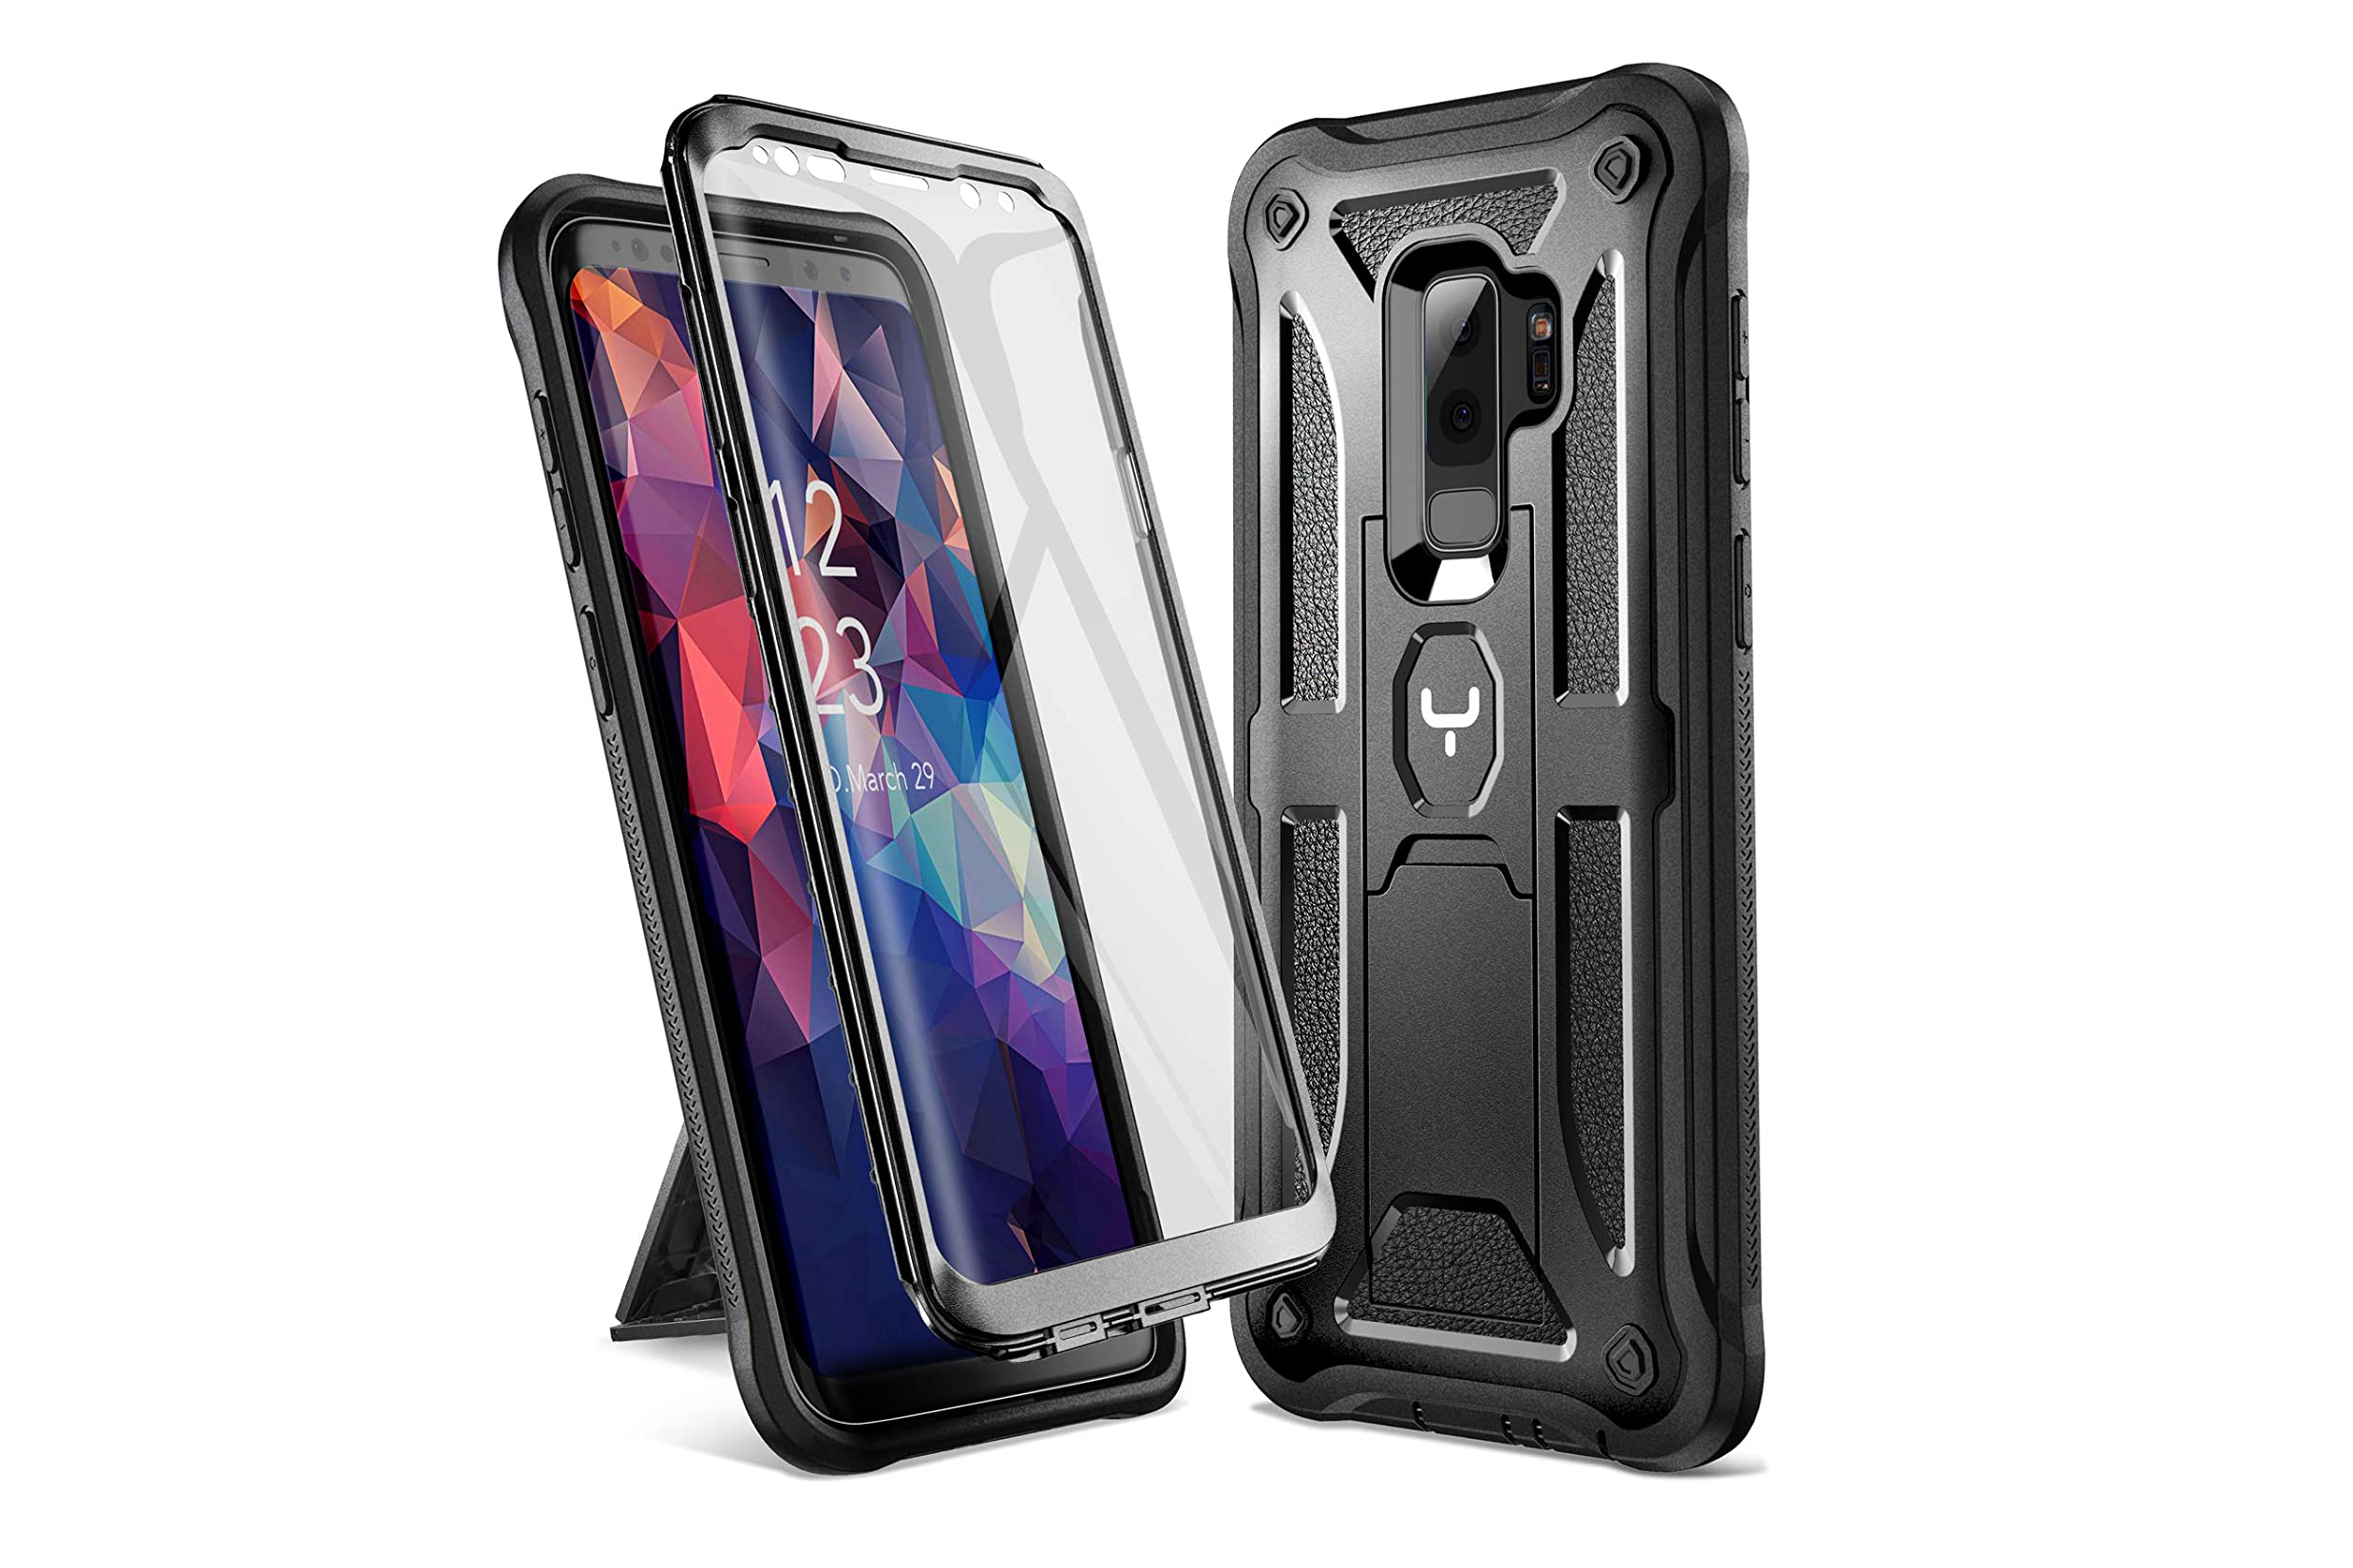 The Best Samsung Galaxy S9 Plus Cases and Covers